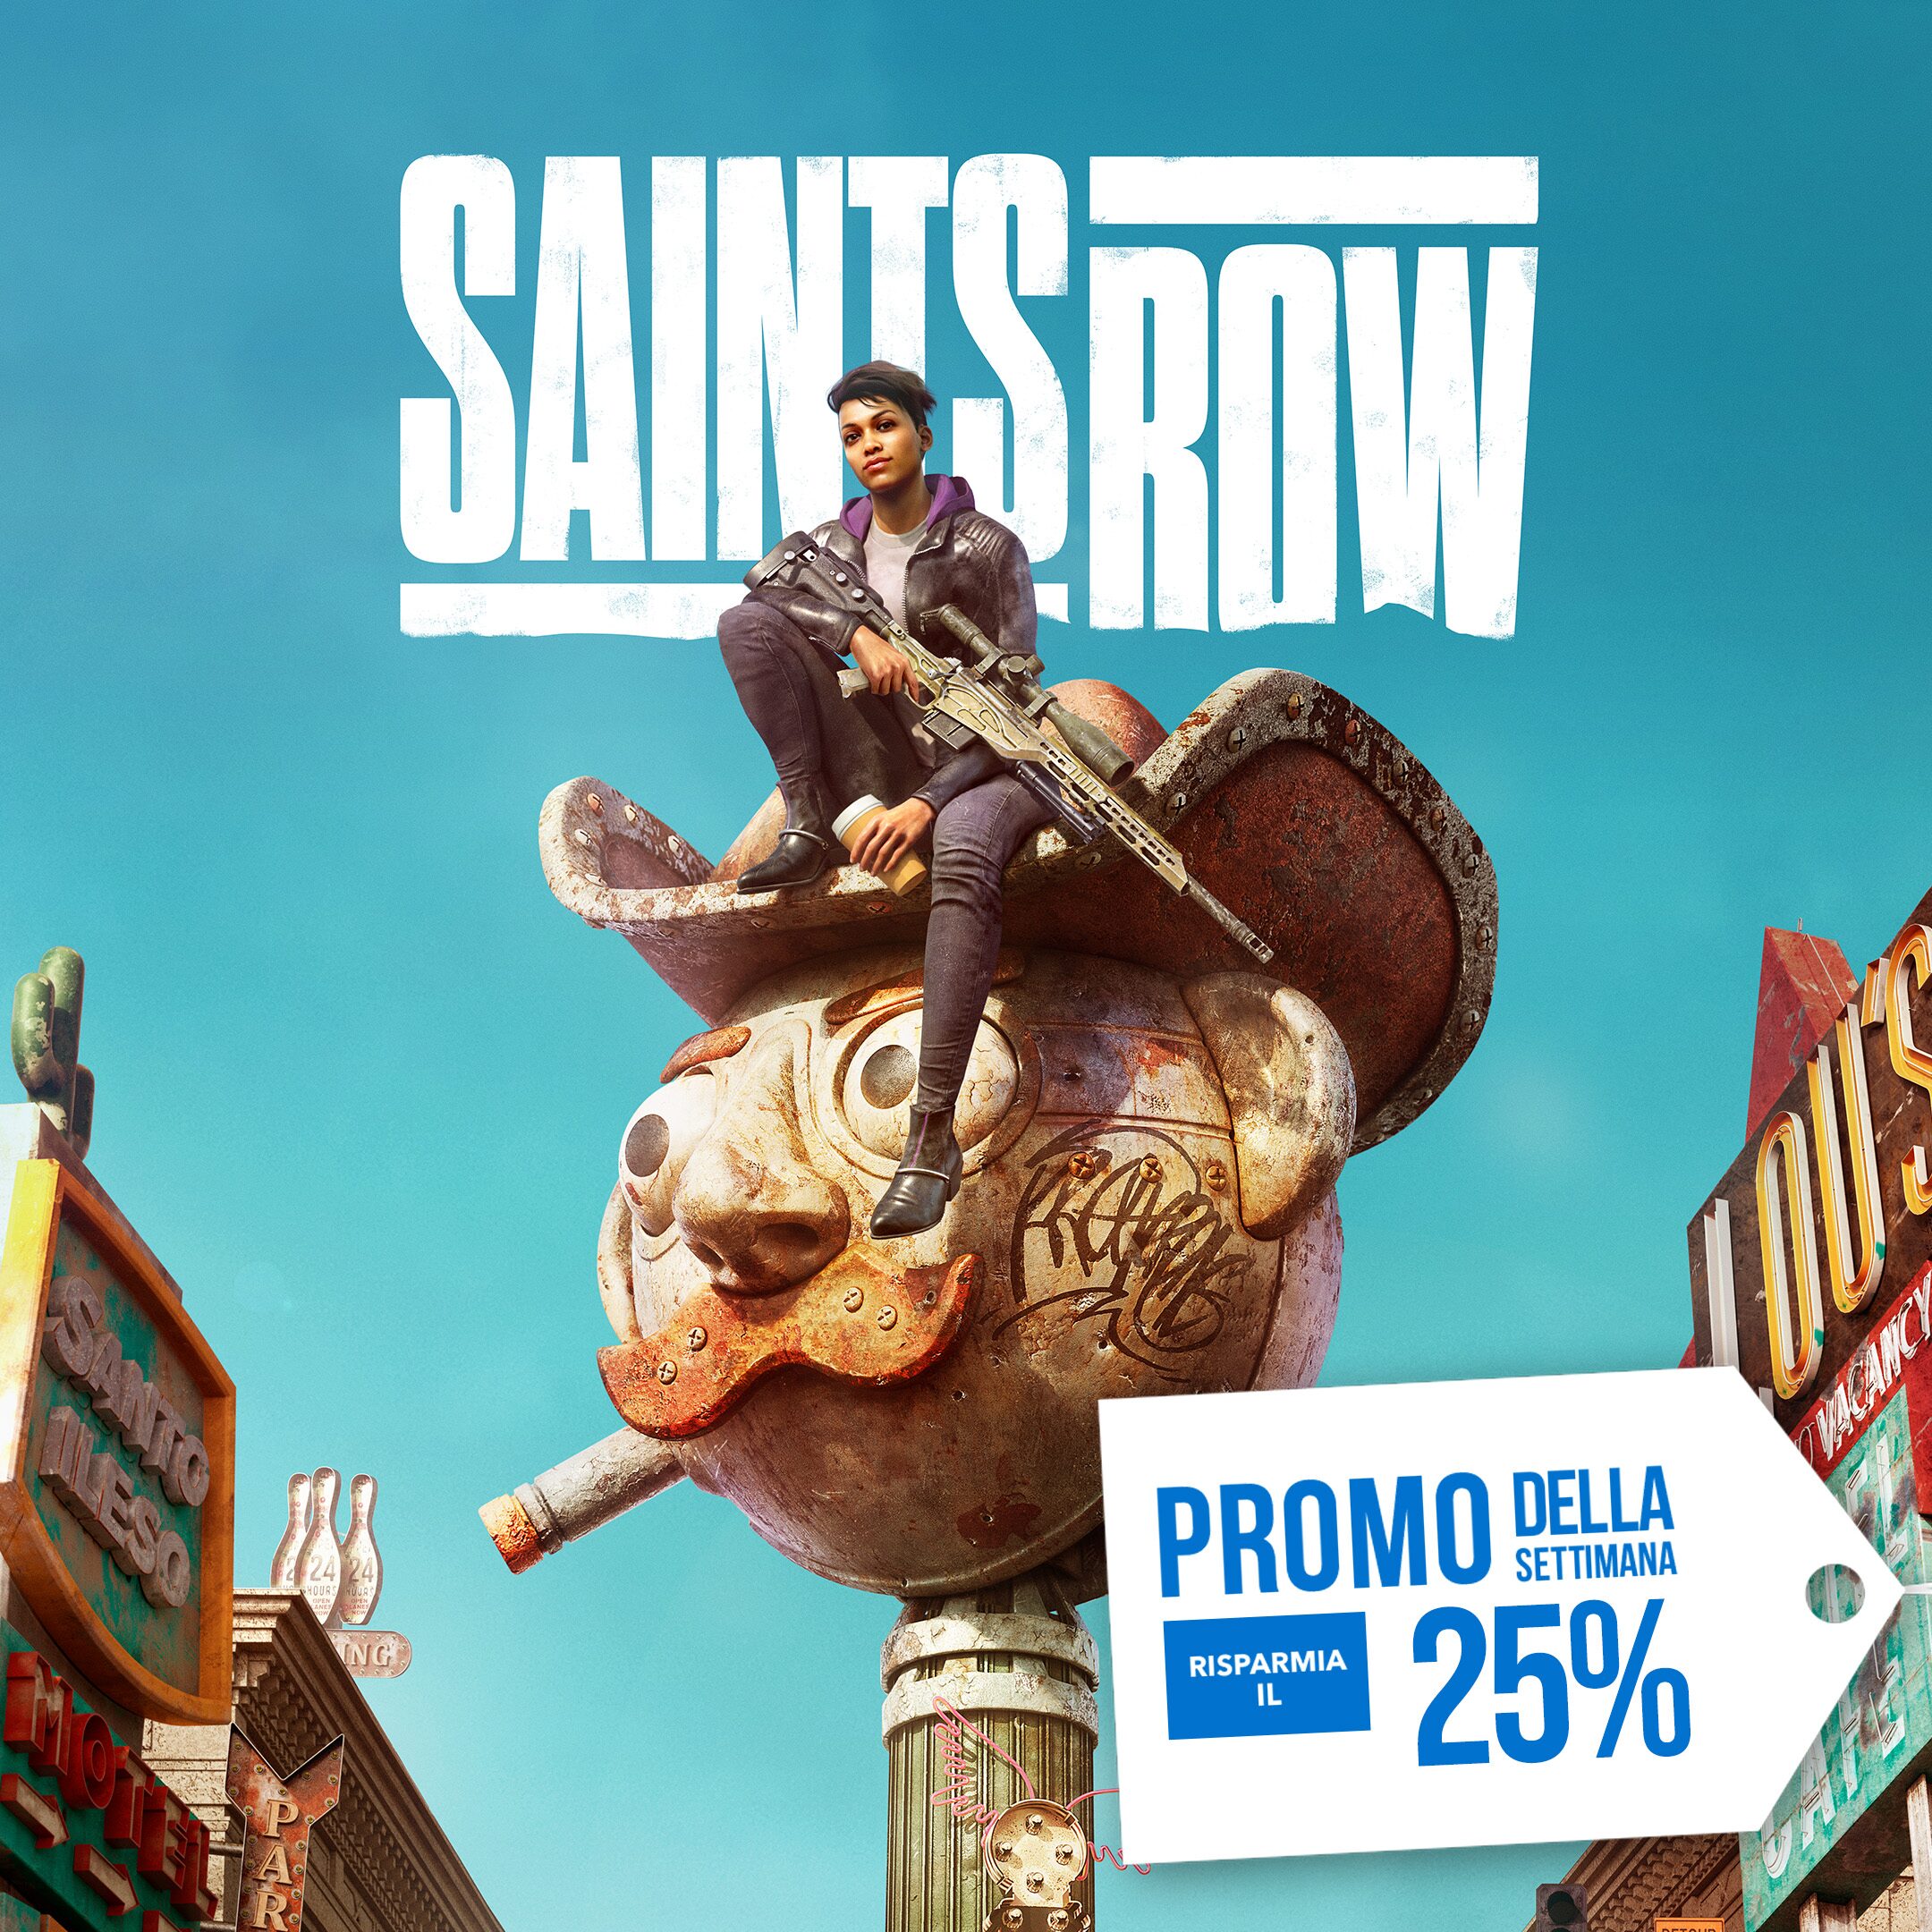 [PROMO] Deal of the Week 9/28 - Saints Row